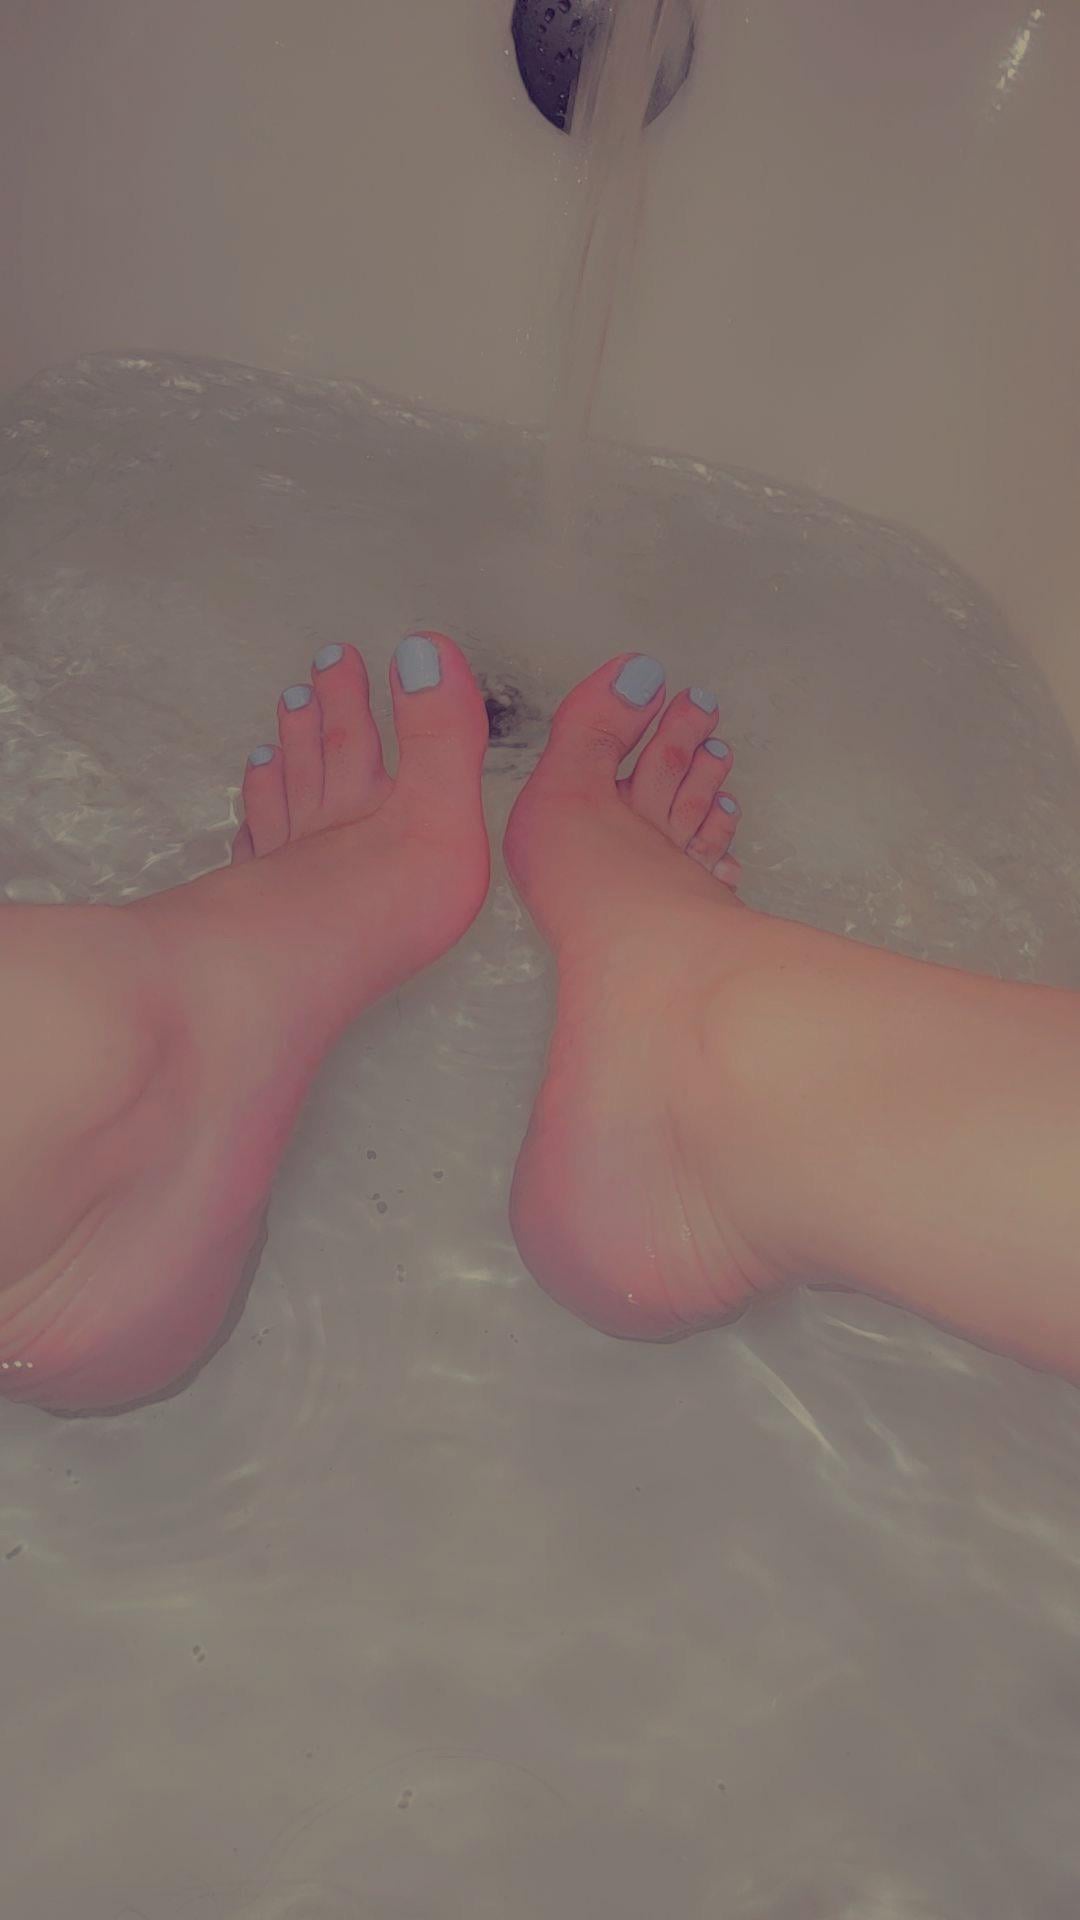 Wanna get dirty with me in the bath